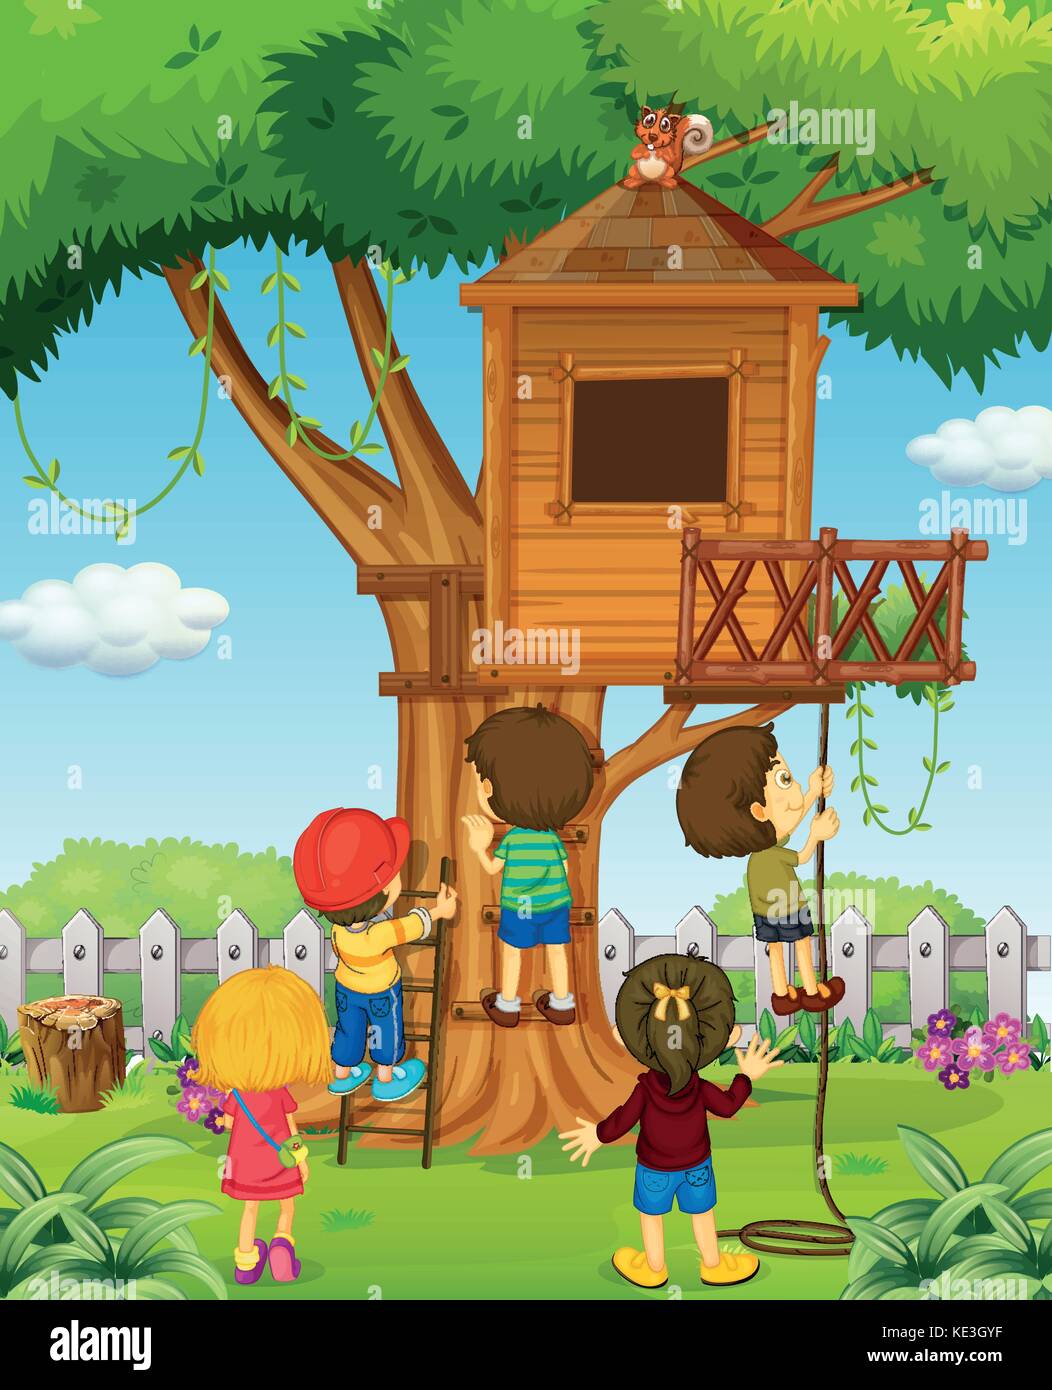 Children playing on the treehouse illustration Stock Vector